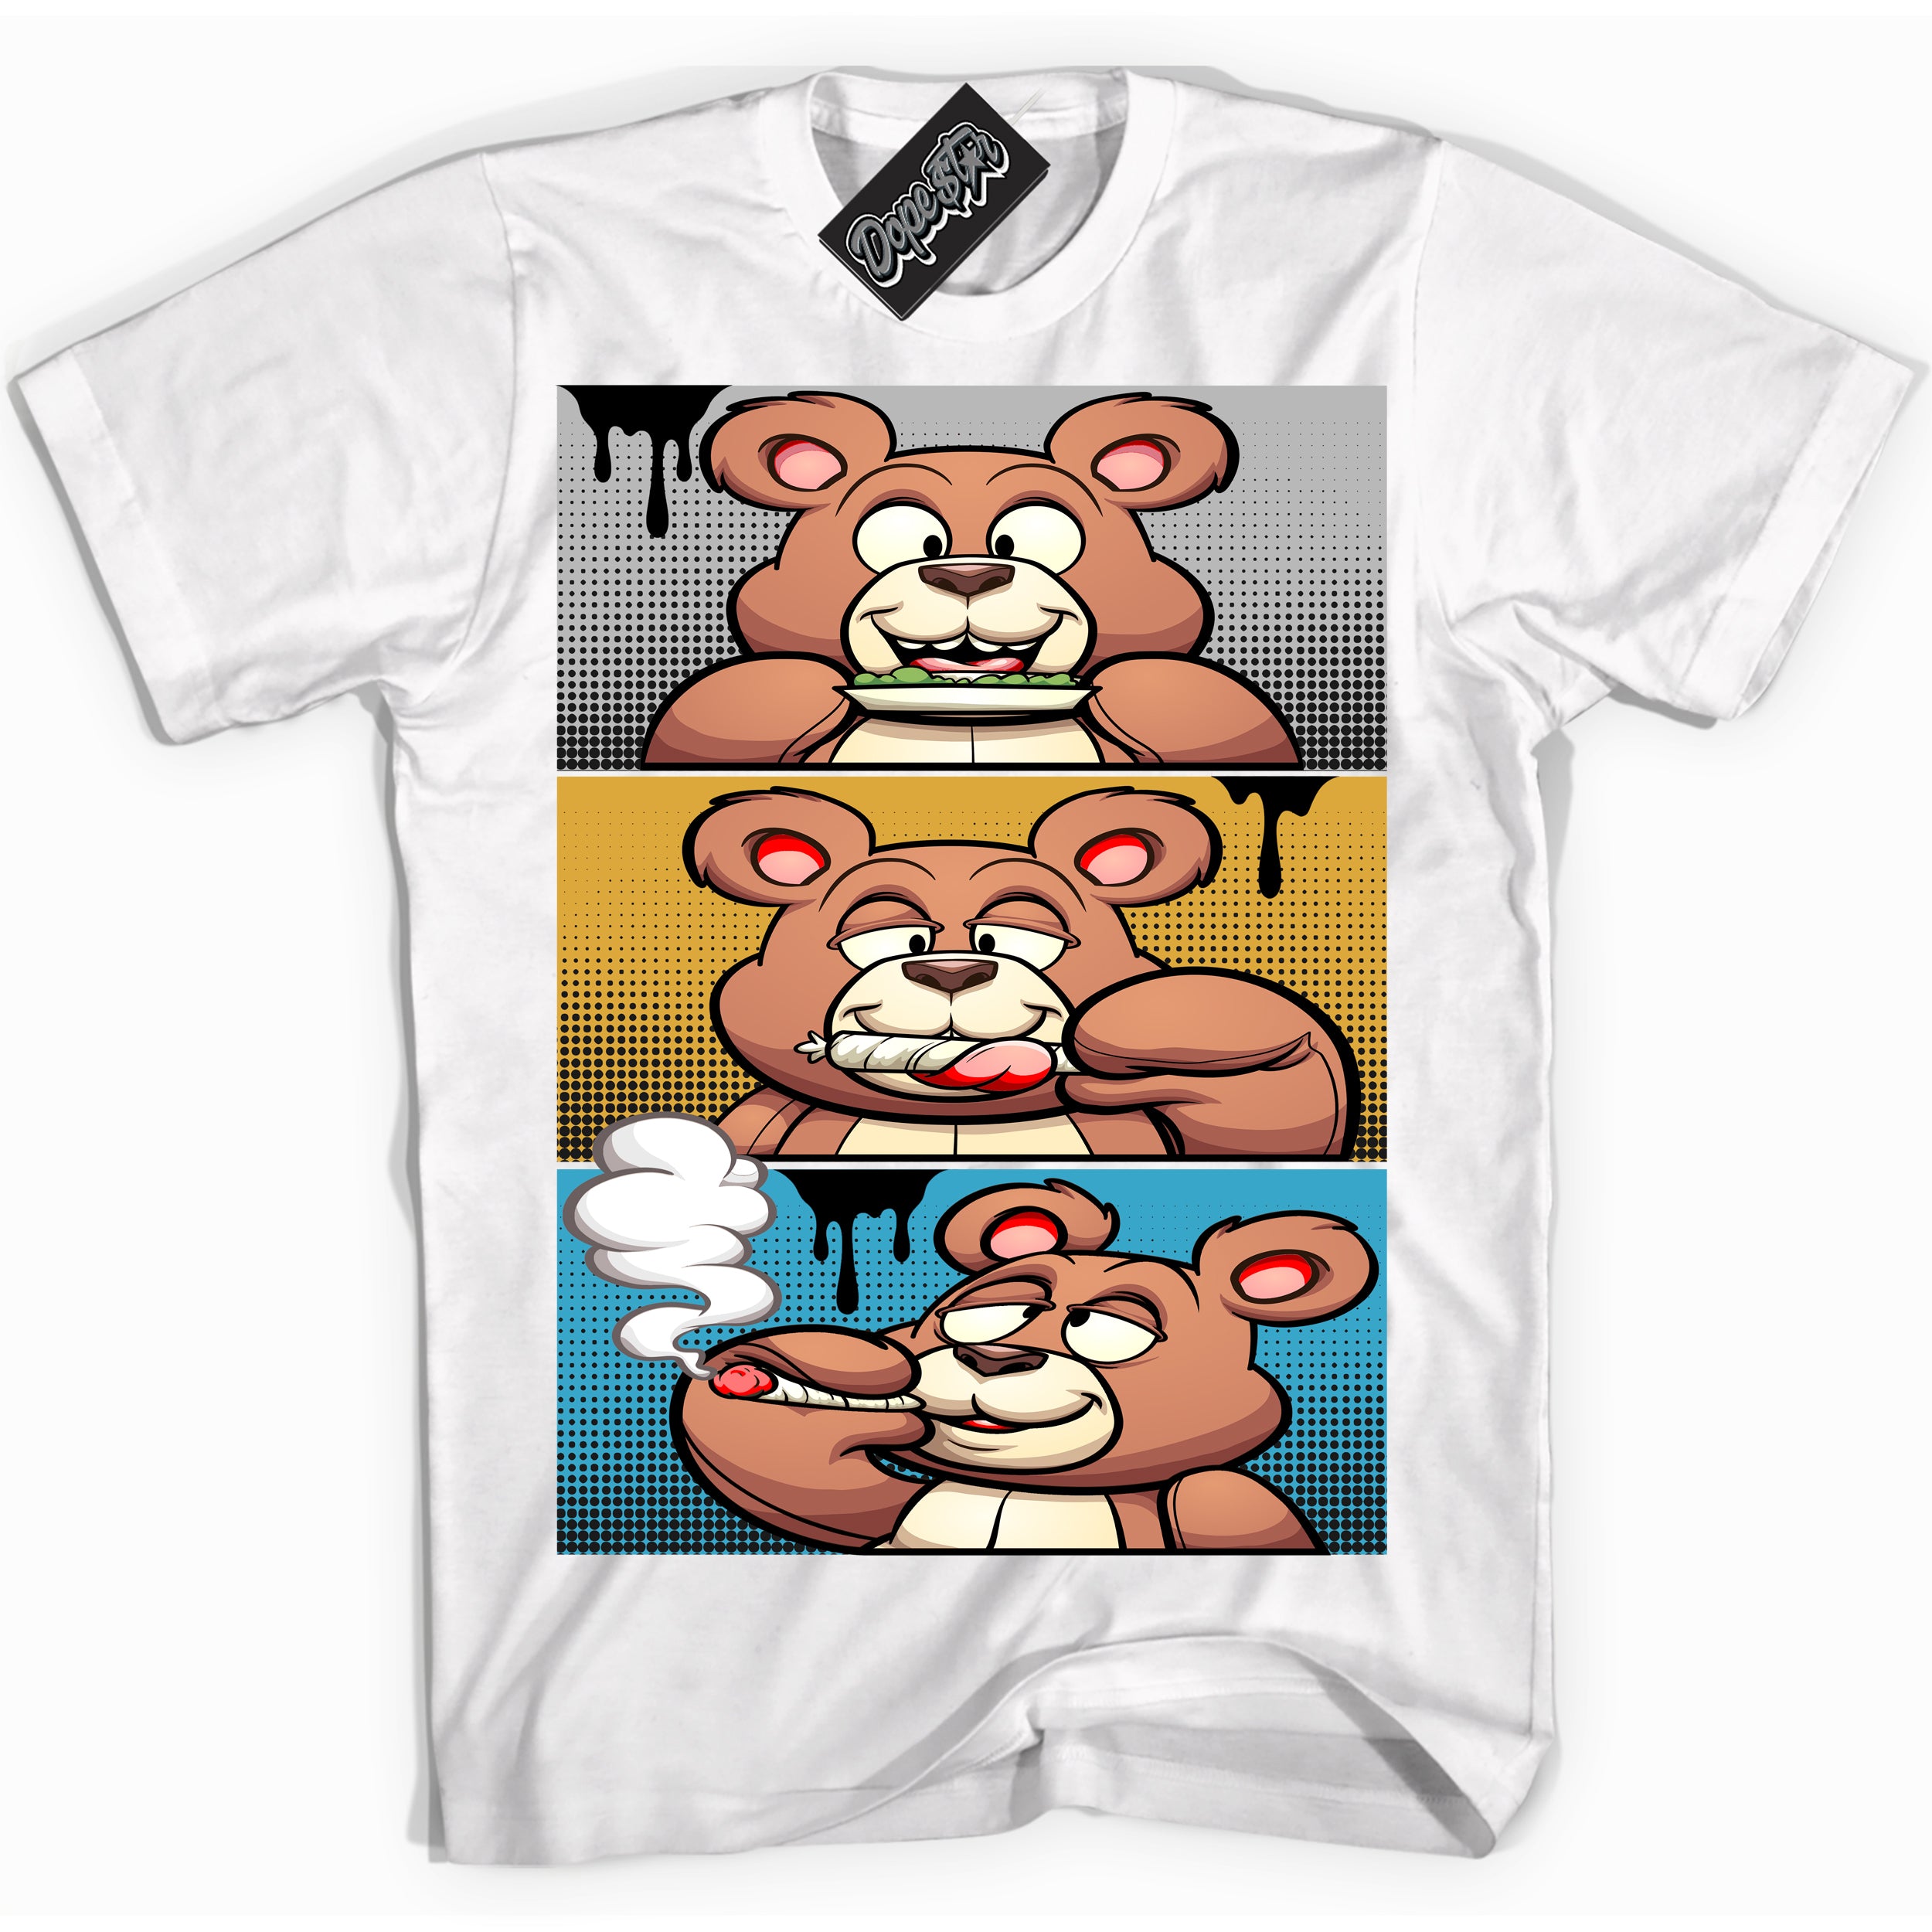 Cool White Shirt with “ Roll It Lick It Smoke It Bear” design that perfectly matches Aqua 5s Sneakers.